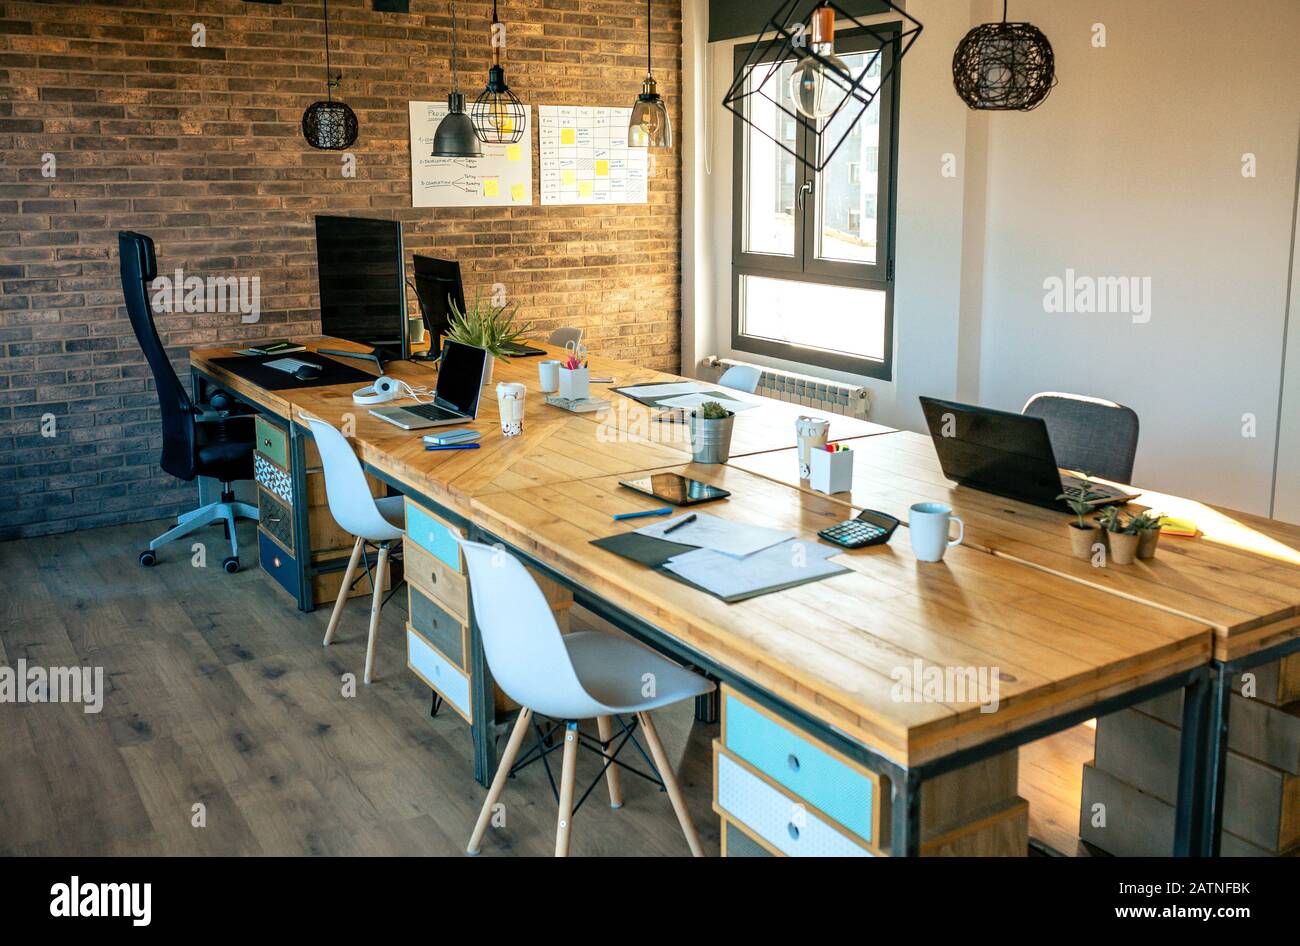 Interior Of Industrial Style Coworking Office Stock Photo